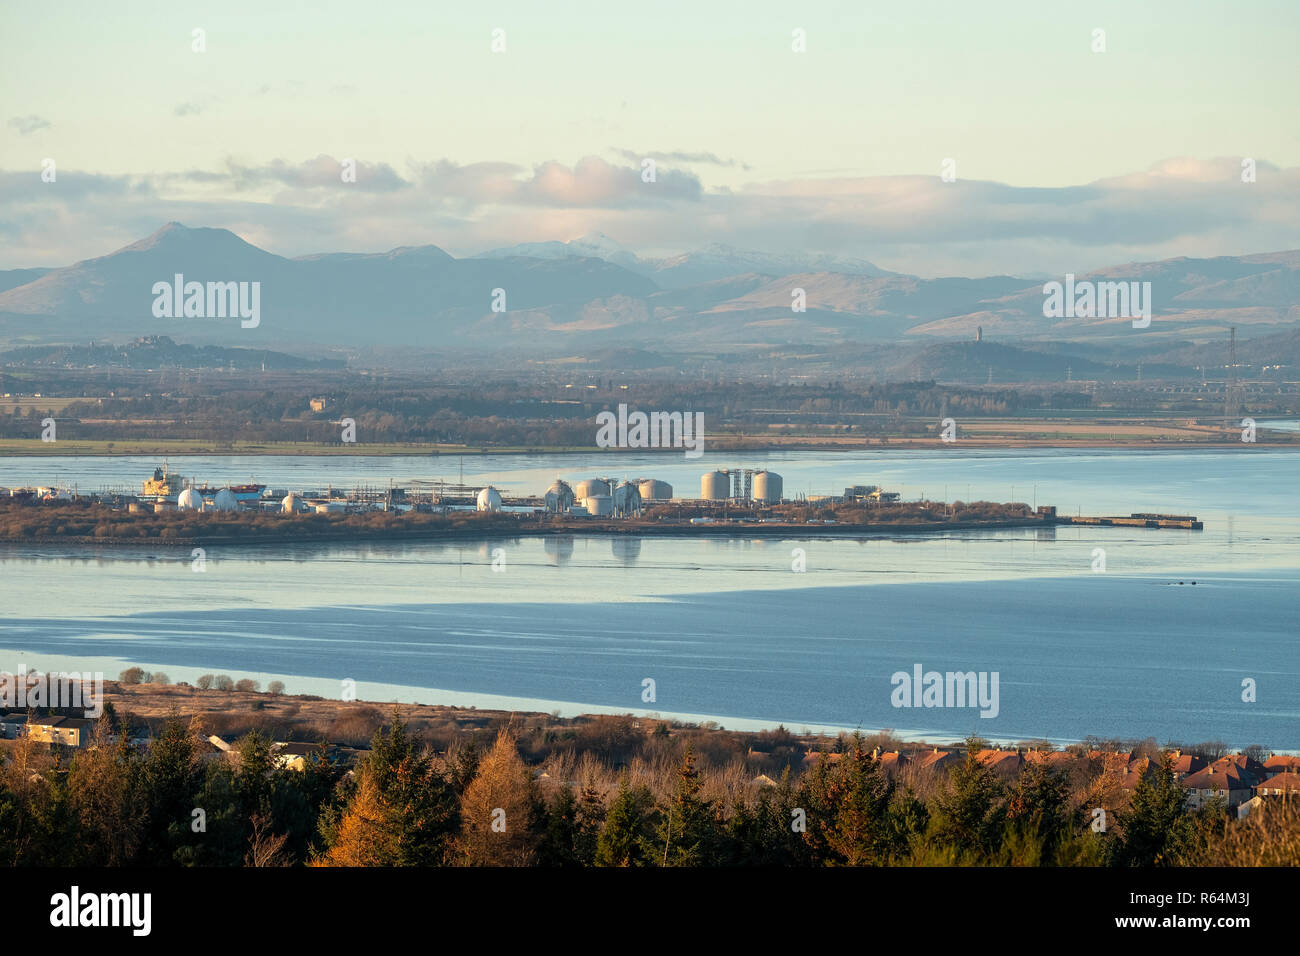 A view looking west over the Grangemouth oil refinery and the Firth of Forth estuary, Scotland. Stock Photo